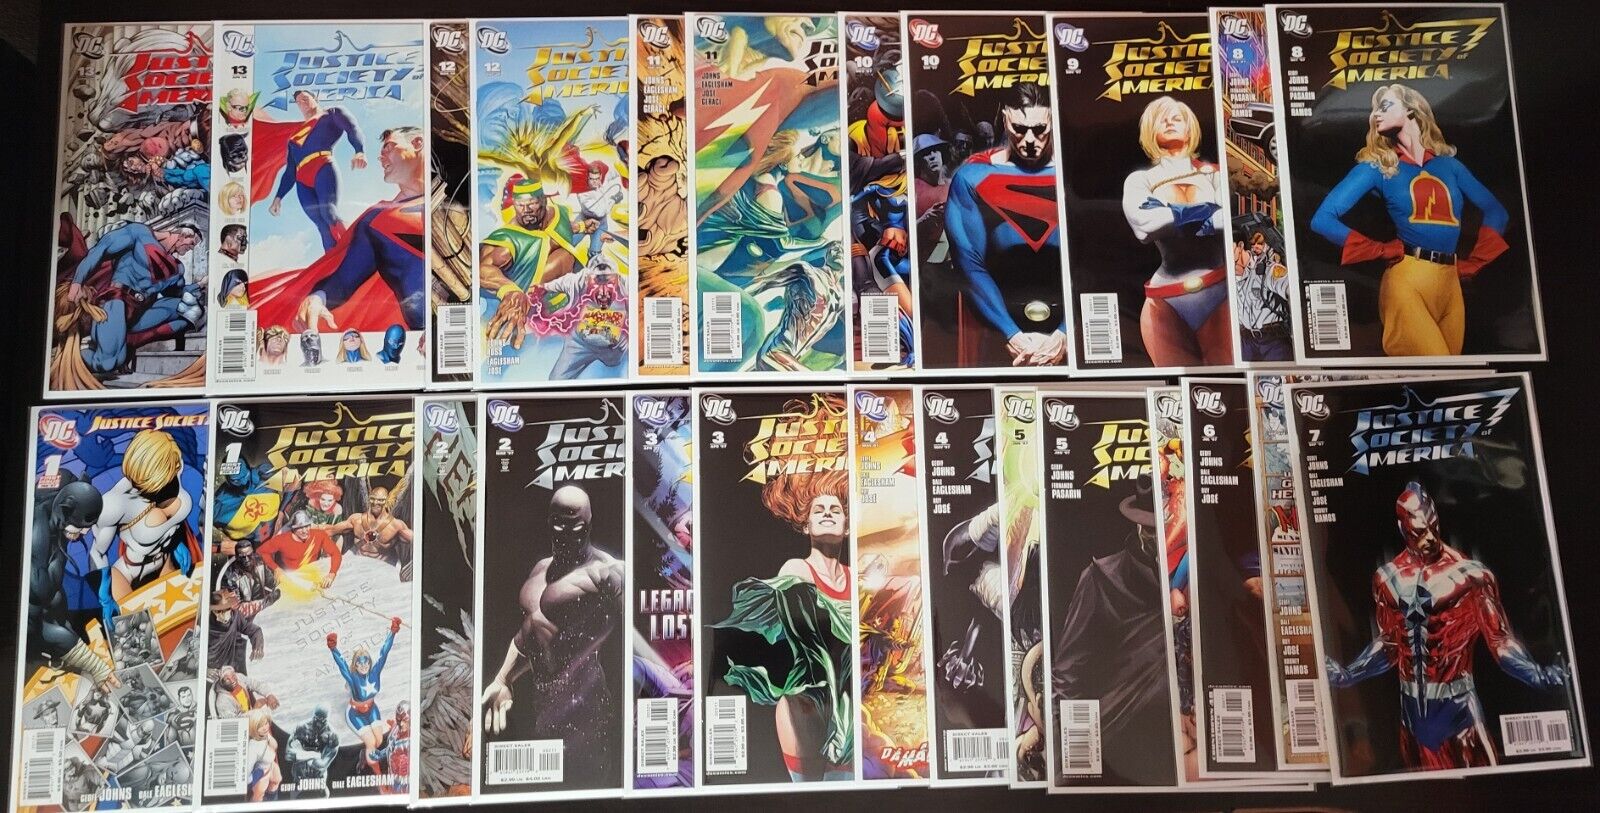 Justice Society of America #1 -#13 Alex Ross Covers + Some Variants Lot of 25 DC